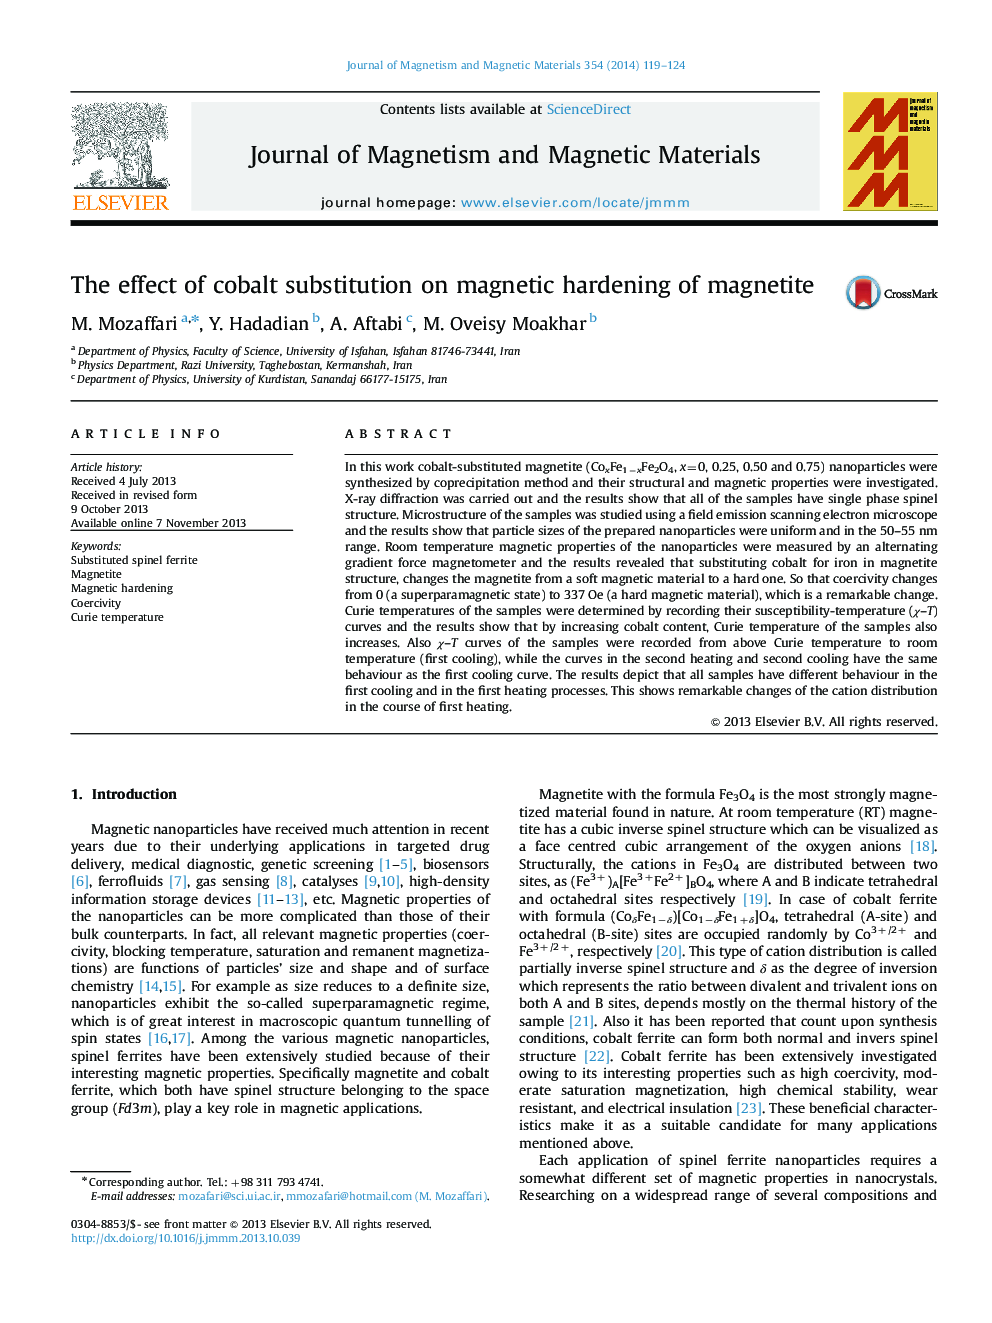 The effect of cobalt substitution on magnetic hardening of magnetite